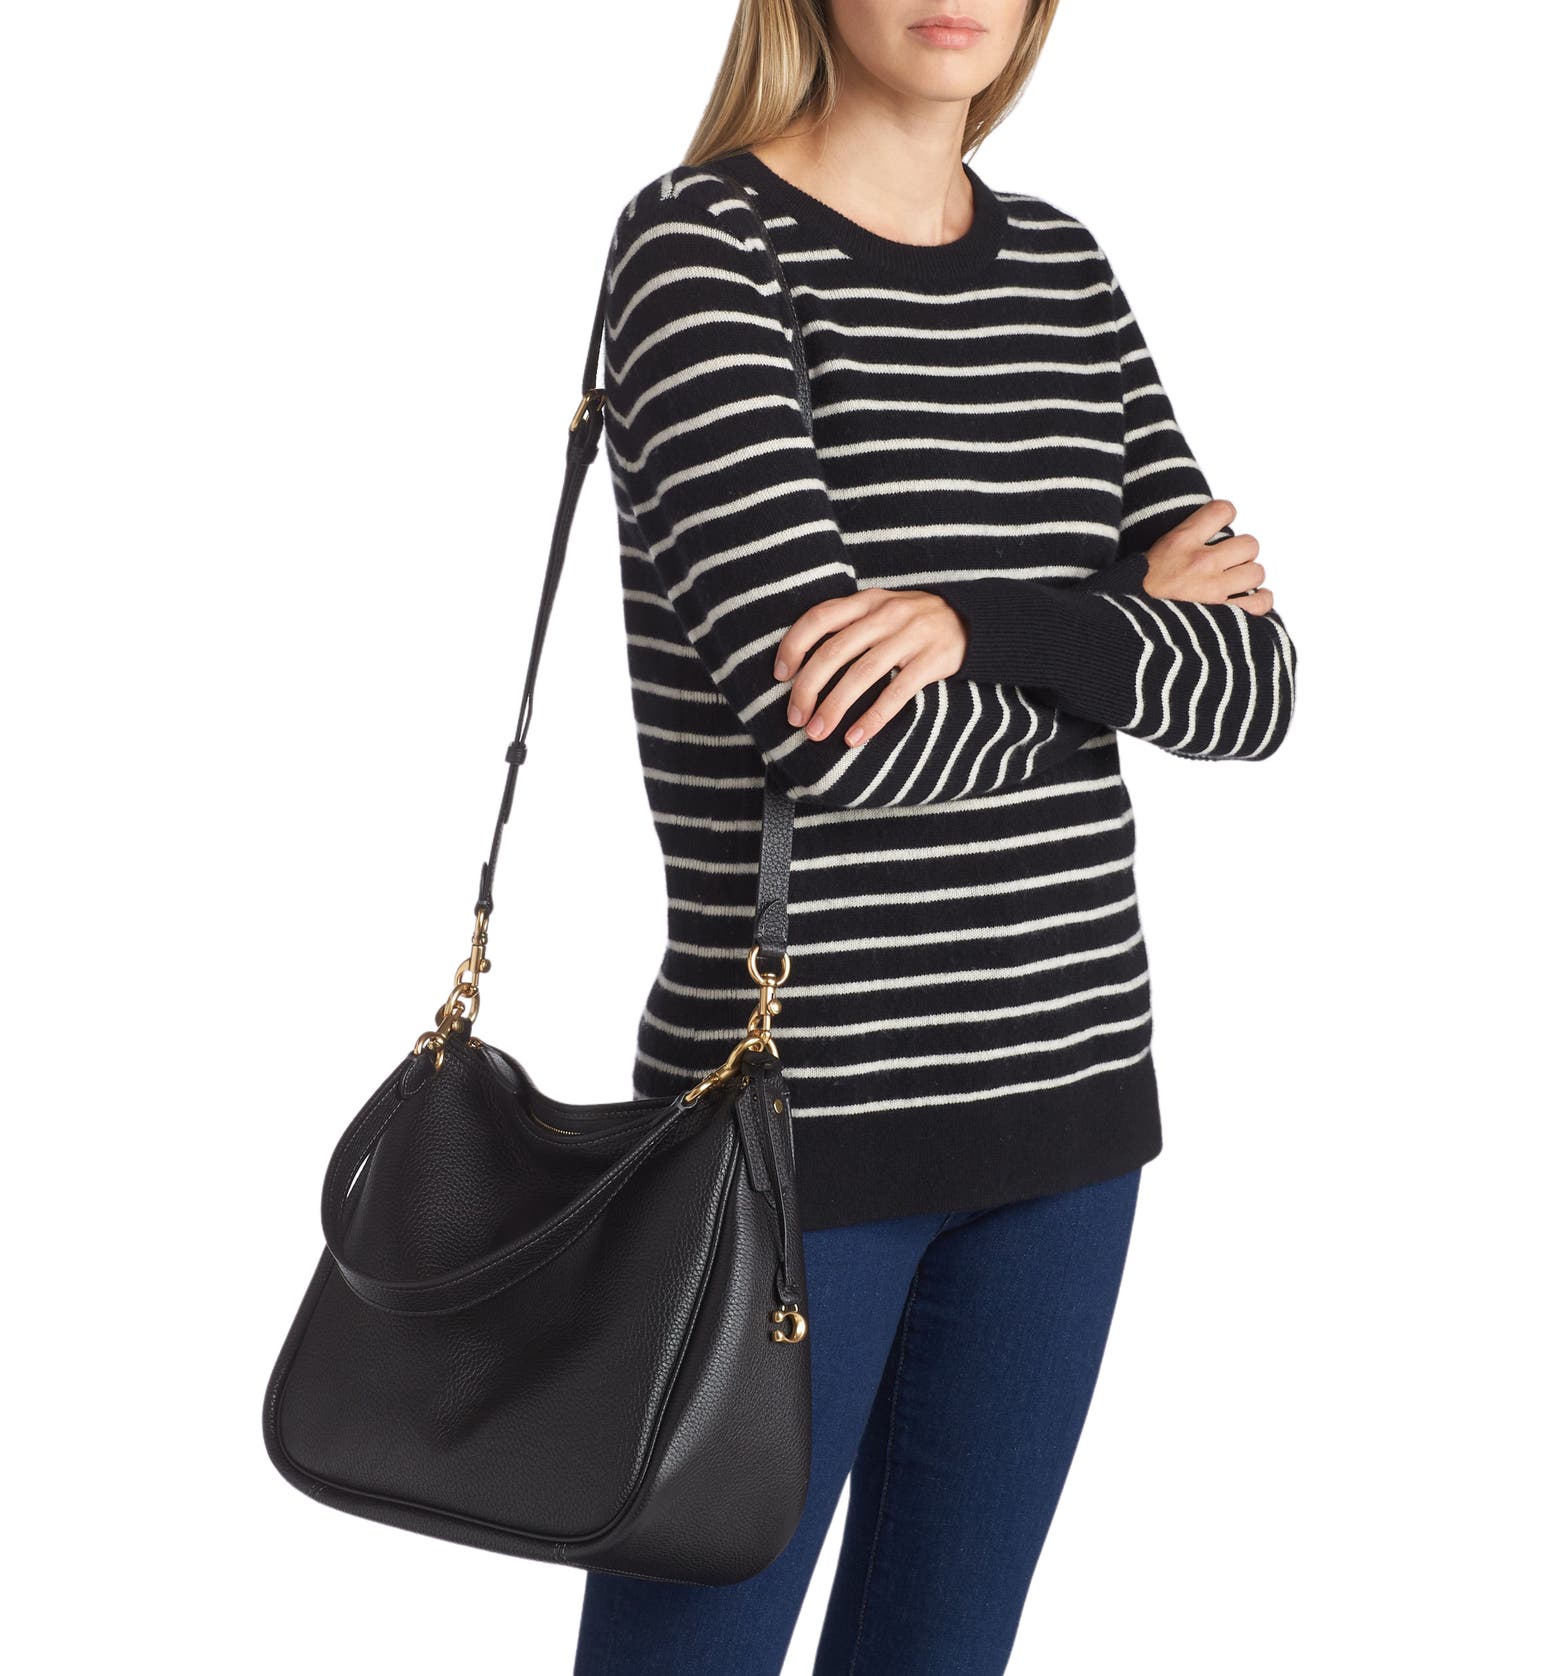 Shoulder bag for convenience and how to dress it?